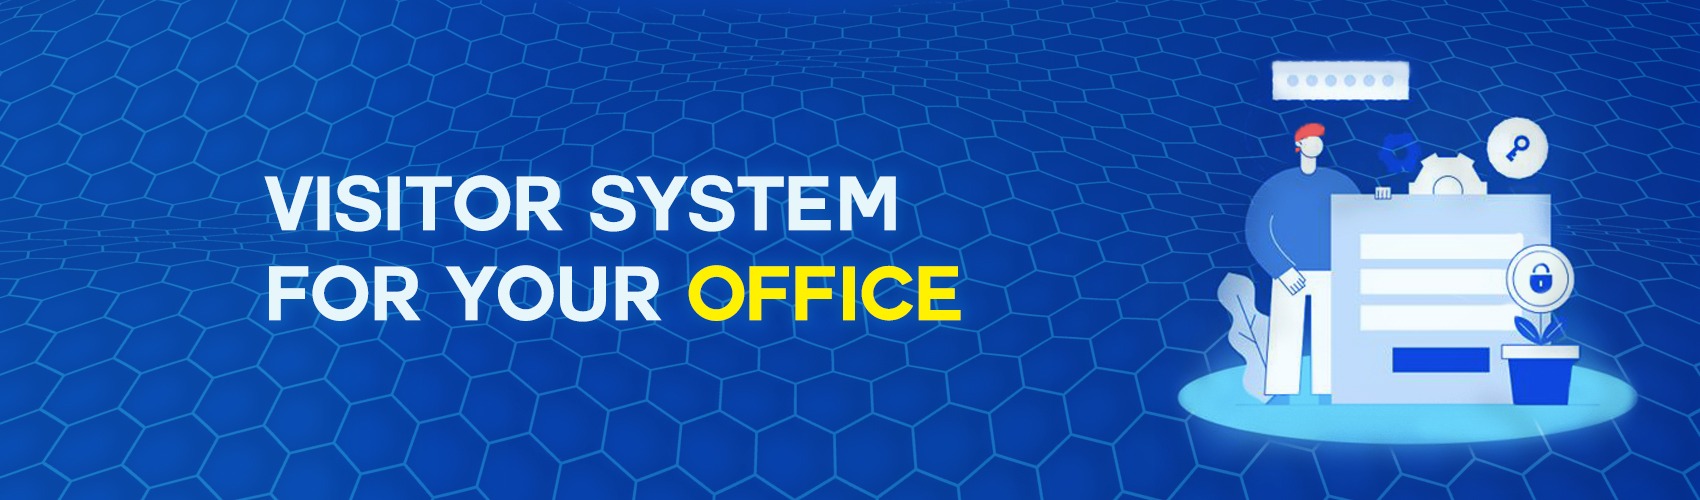 Reasons Why You Need a Visitor Management System for Your Office